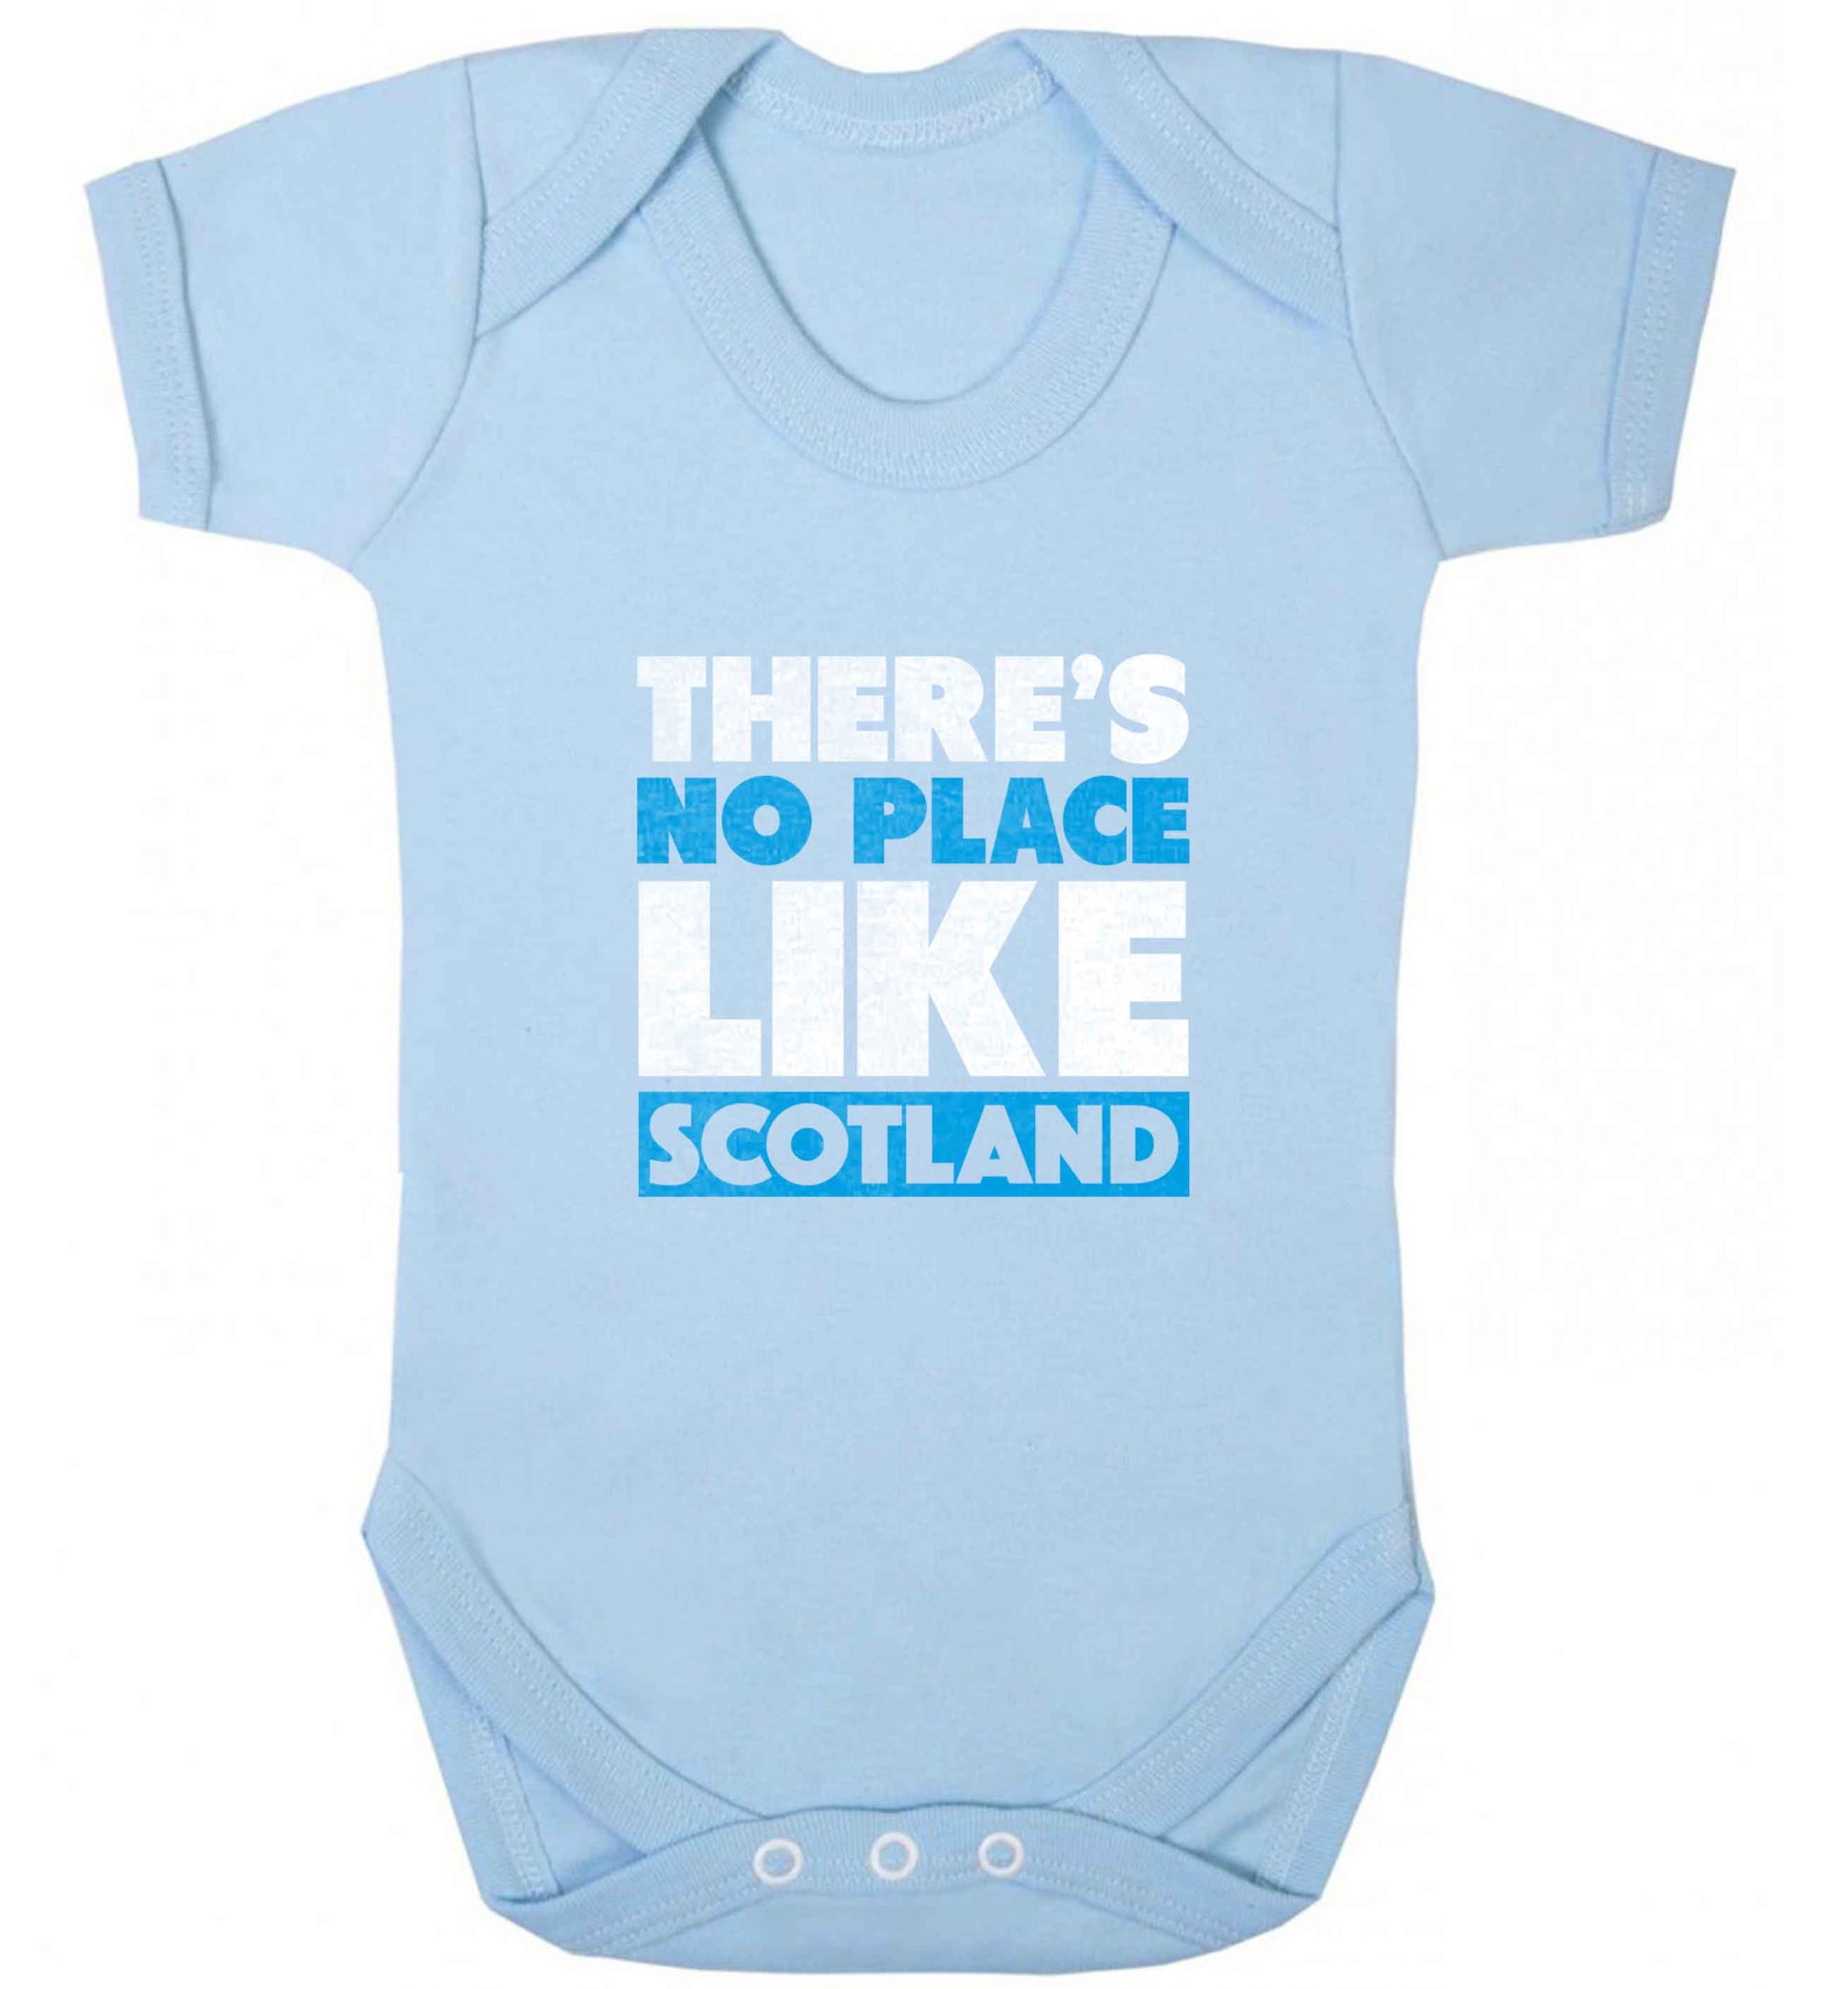 There's no place like Scotland baby vest pale blue 18-24 months